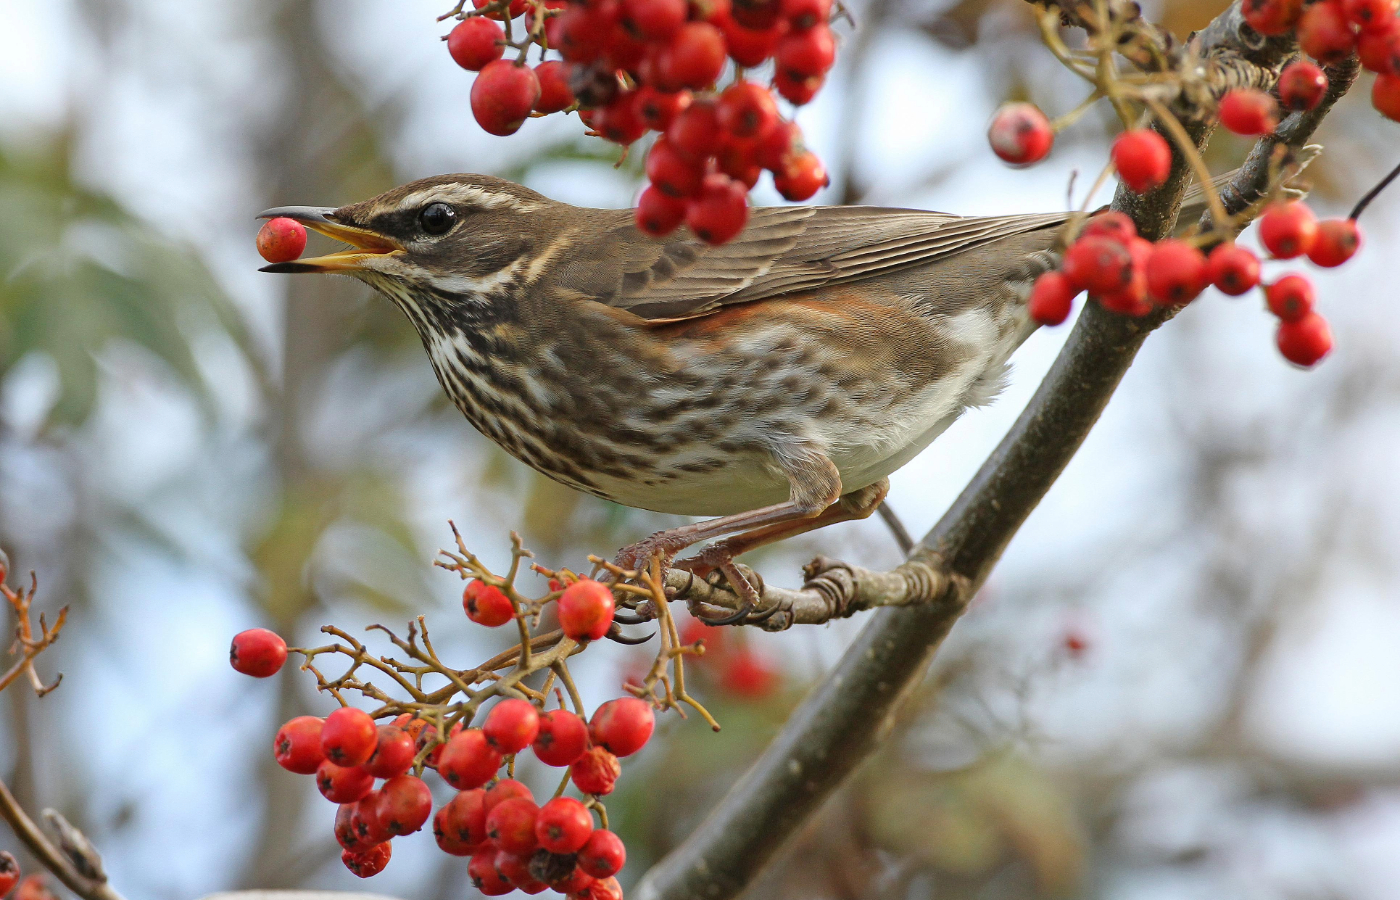 Redwing bird in Dumfries and Galloway.